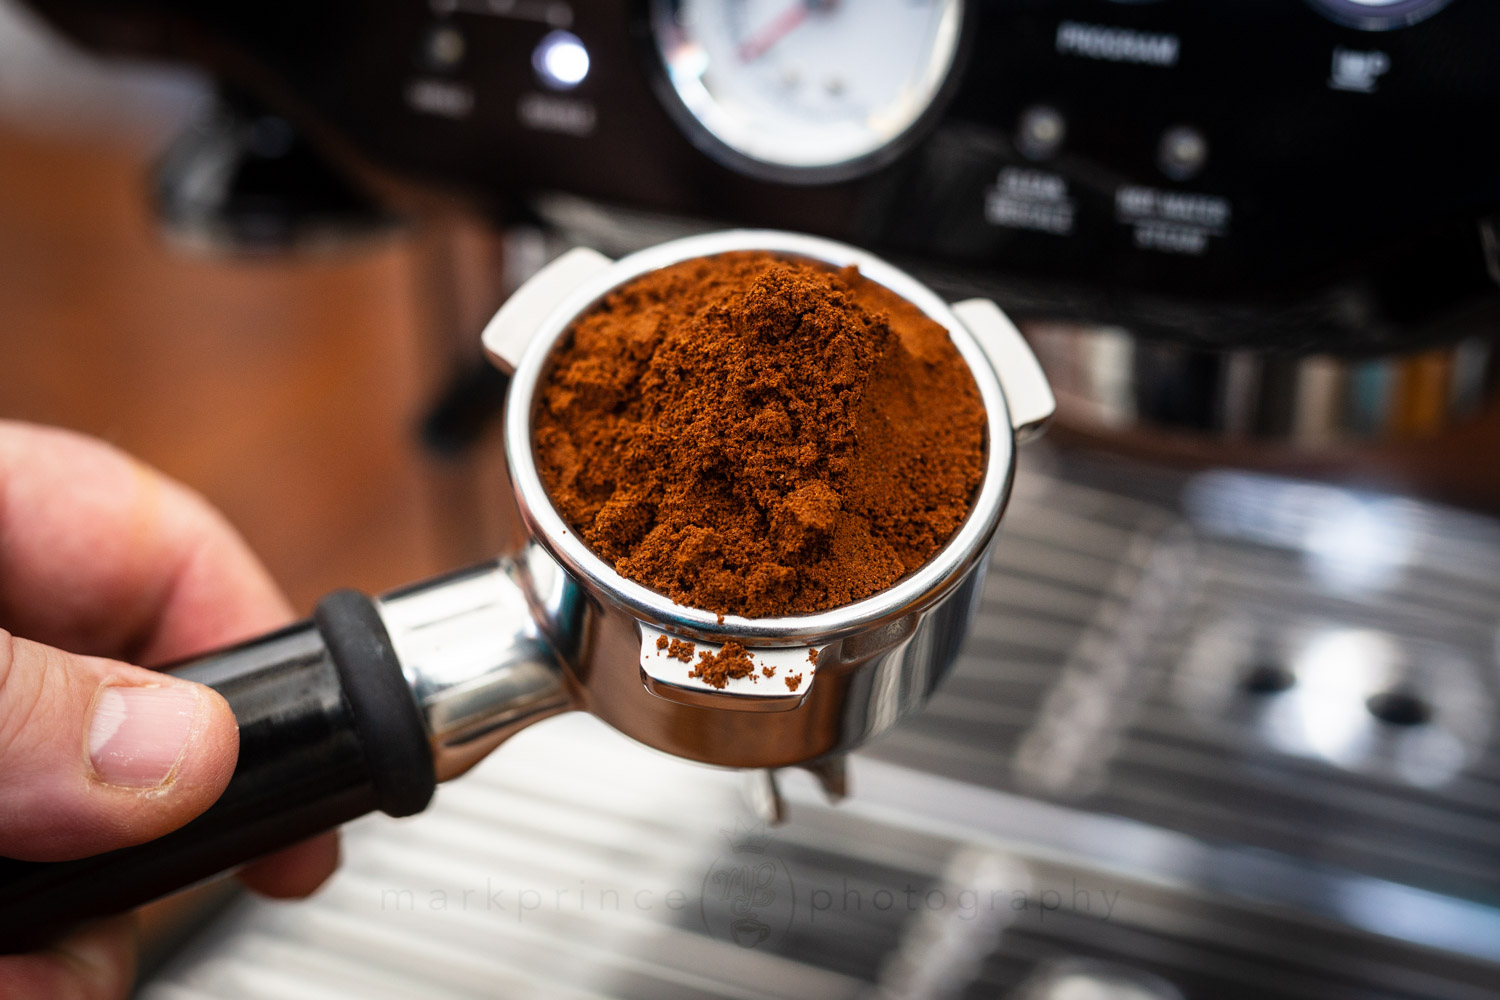 How To Make a Latte: a Detailed Guide » CoffeeGeek